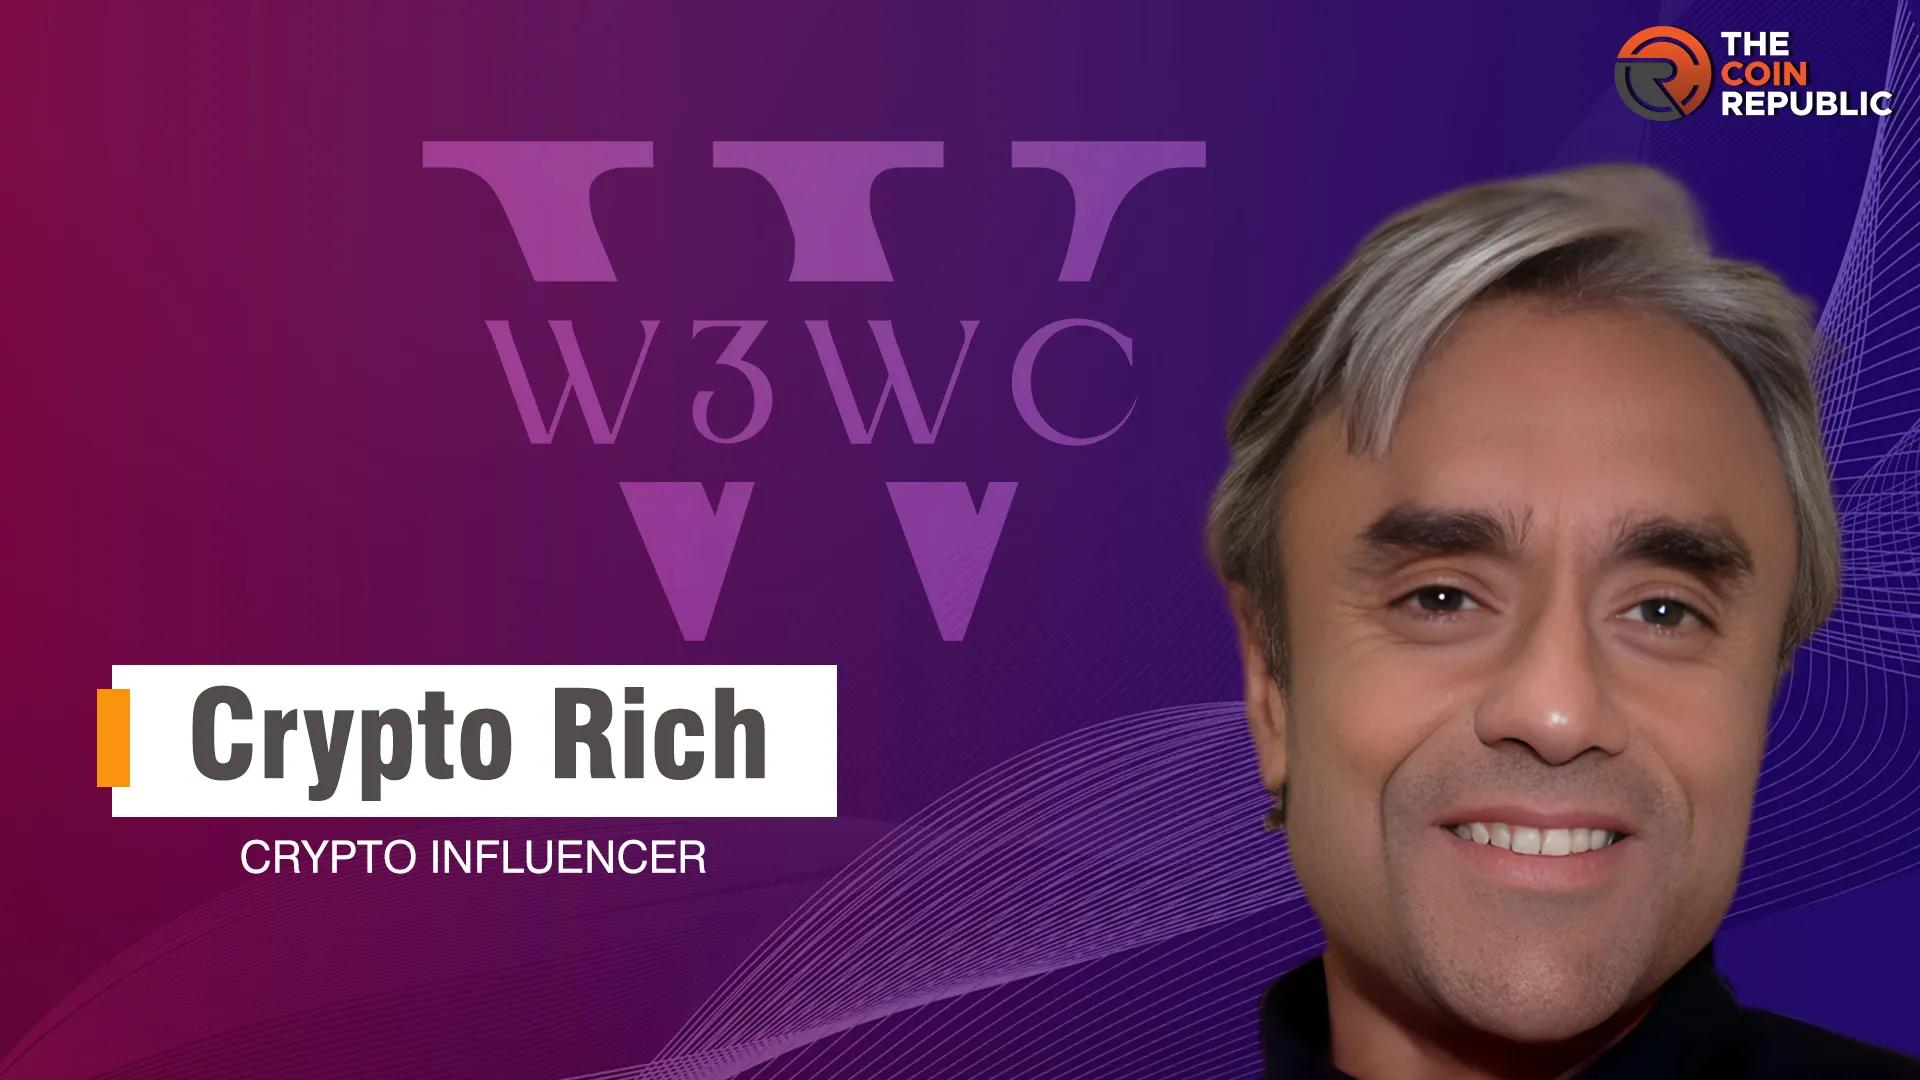 CryptoRich & His Crypto Influencer Journey [Video]